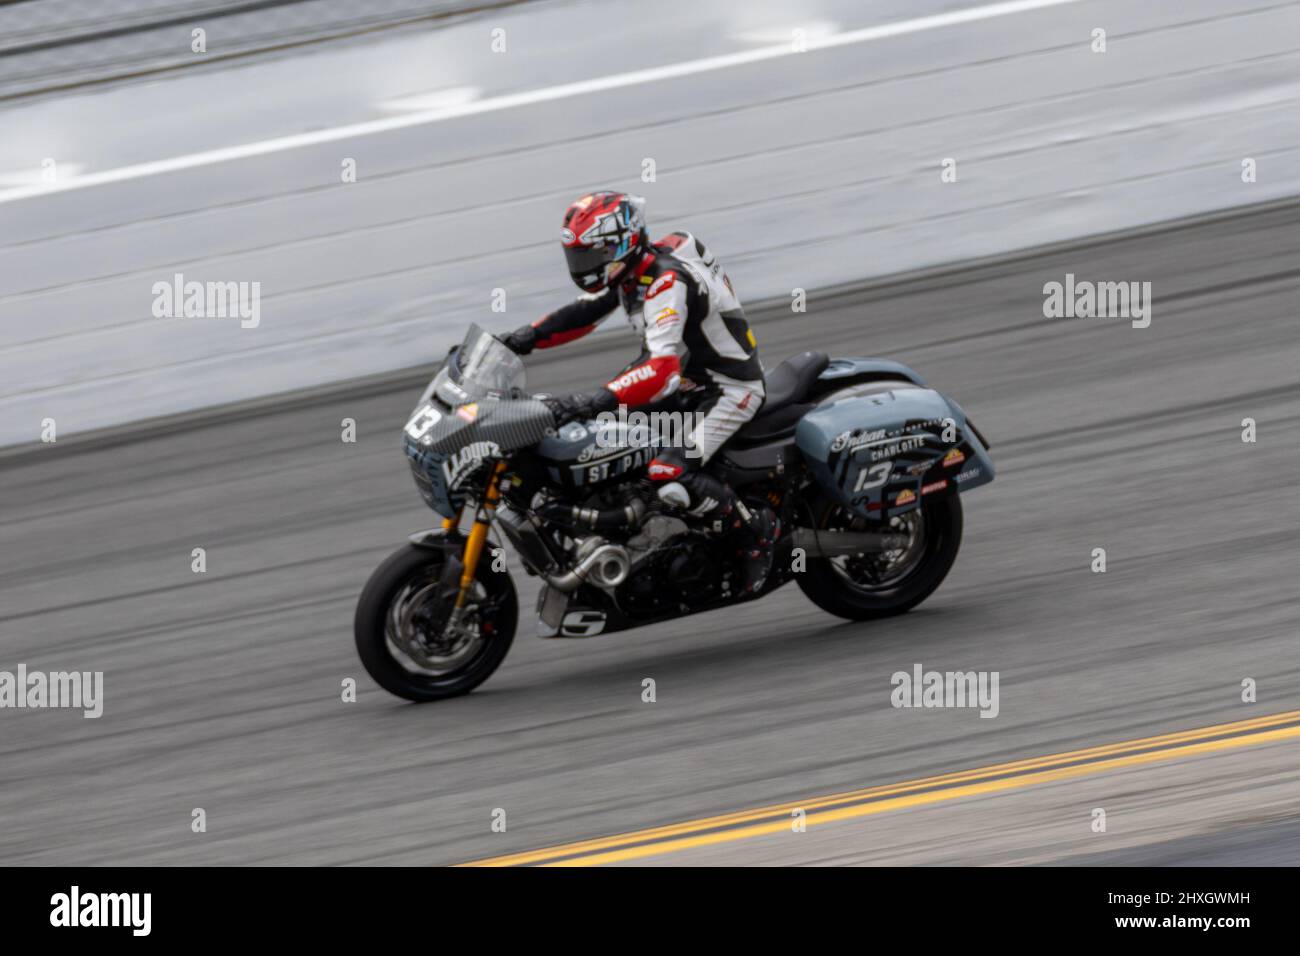 Daytona Beach, FL, USA. 12th March 2022. 13 Cory West goes through the track during the Mission King of the Baggers at Daytona International Speedway in Daytona Beach, FL. 2022, MotoAmerica, home of AMA Superbike and North America's premier motorcycle road racing series. Credit: Yaroslav Sabitov/Yes Market Media/Alamy Live News Stock Photo